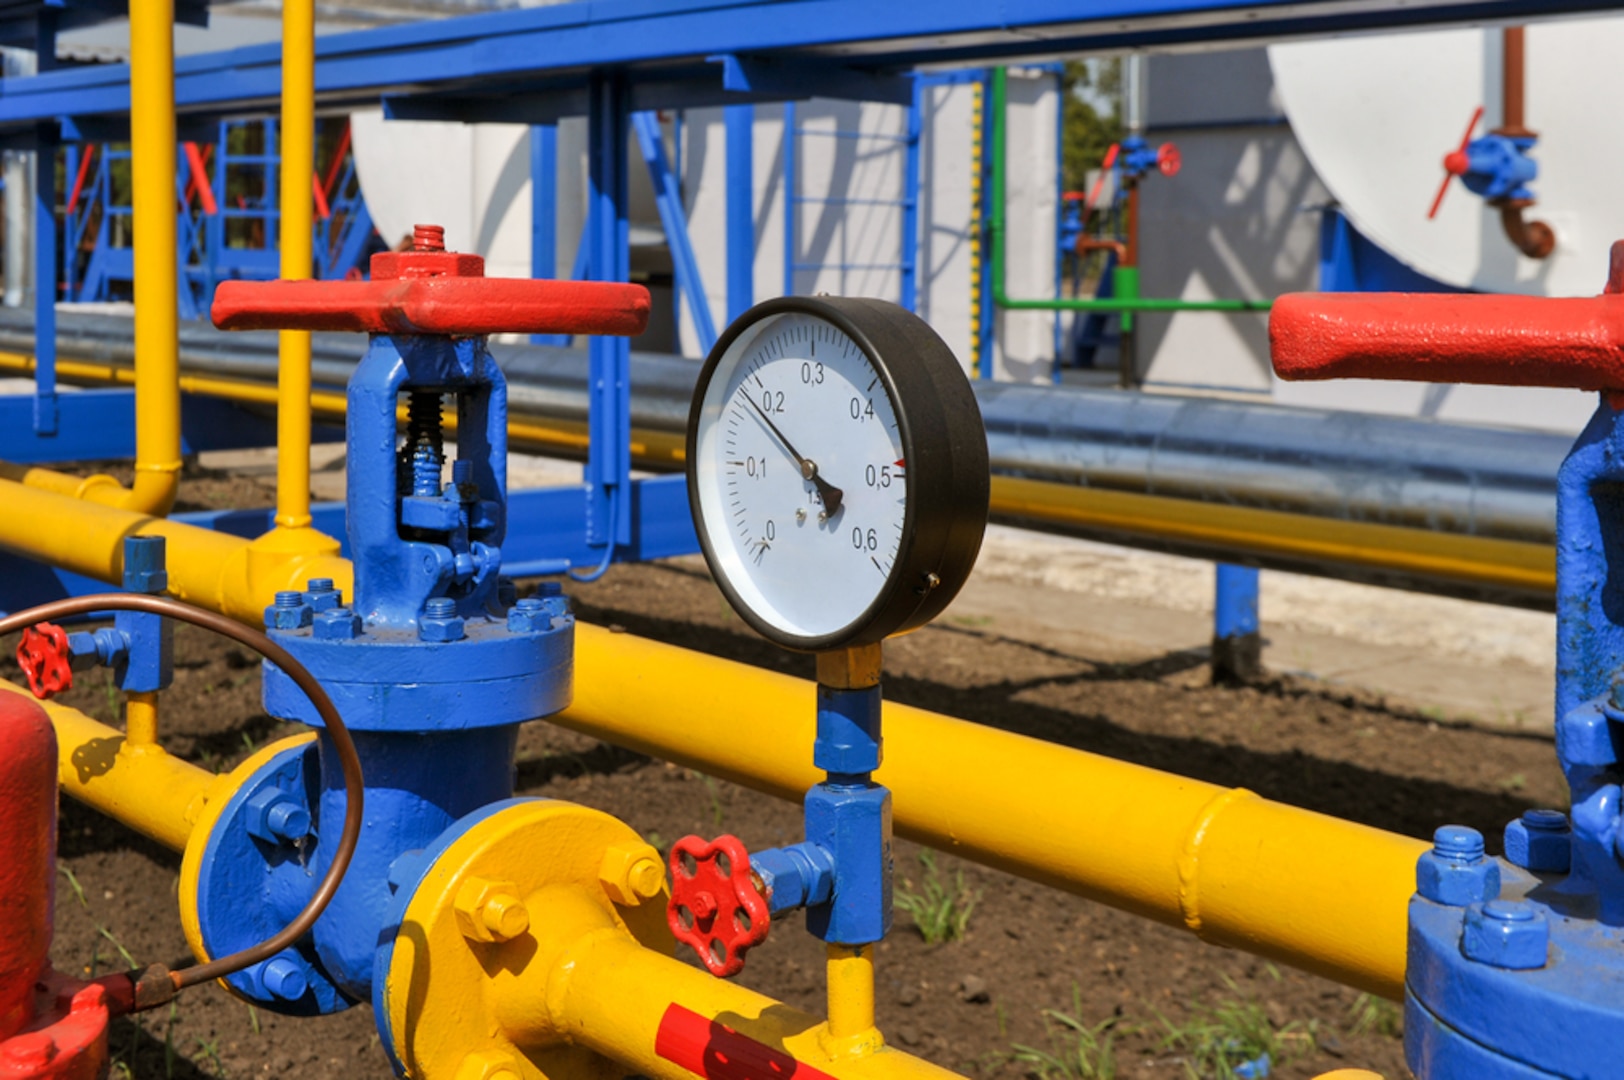 Altus Air Force Base, Oklahoma, and DLA Susquehanna, Pennsylvania, are the newest customers to the Direct Supply Natural Gas Program, represented by this natural gas pressure meter at another location.